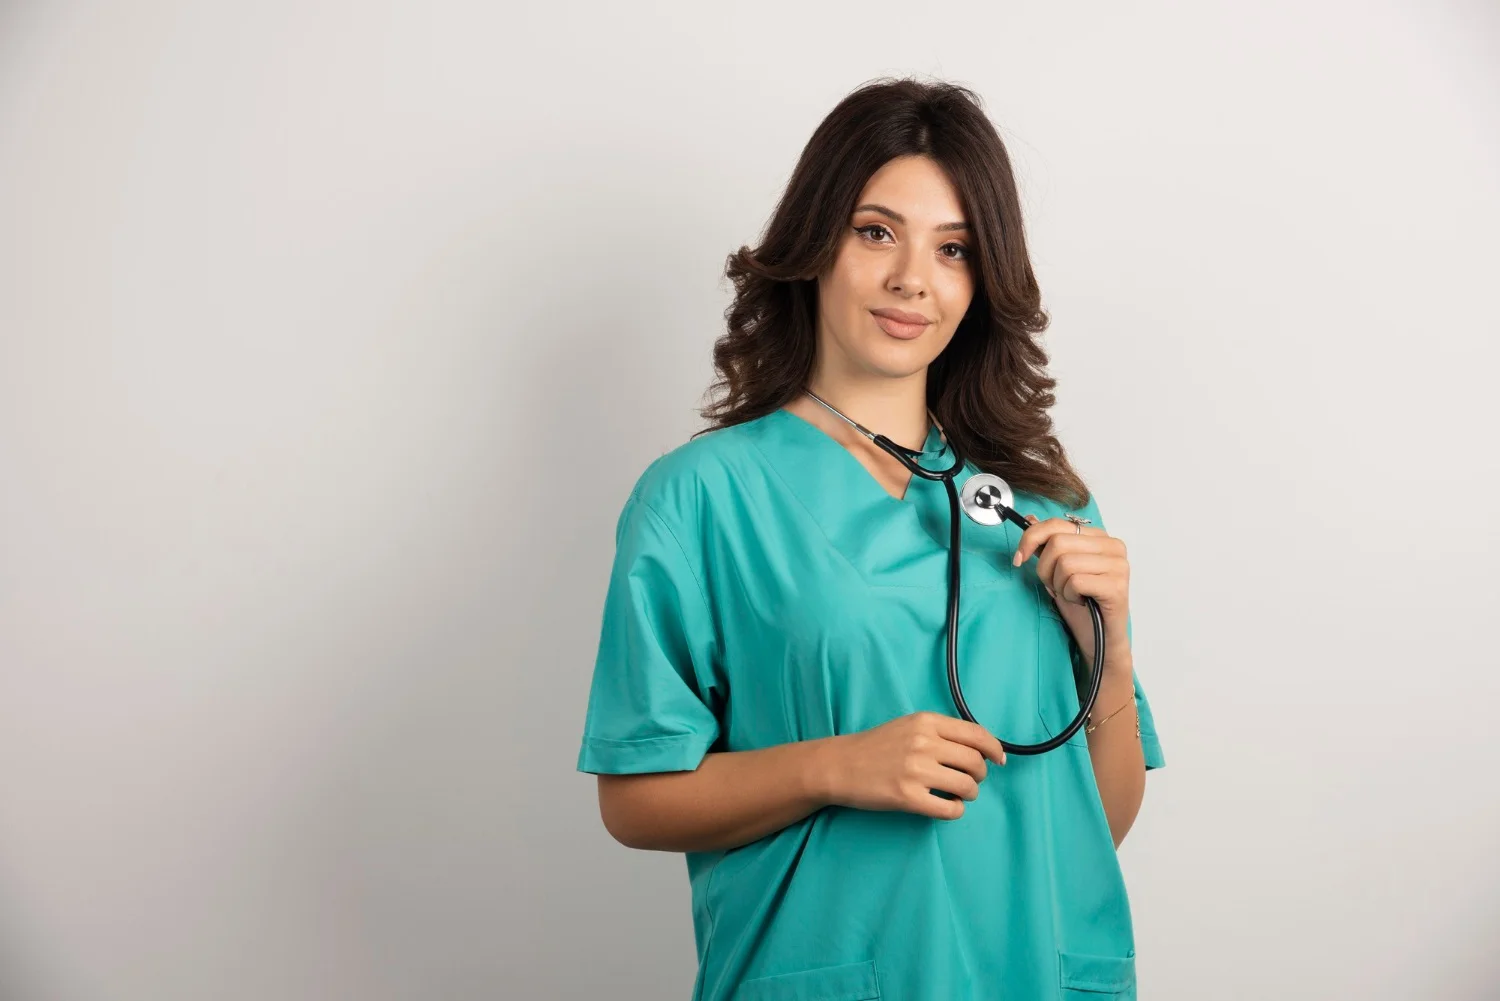 How to Express Your Style in scrubs fashionably